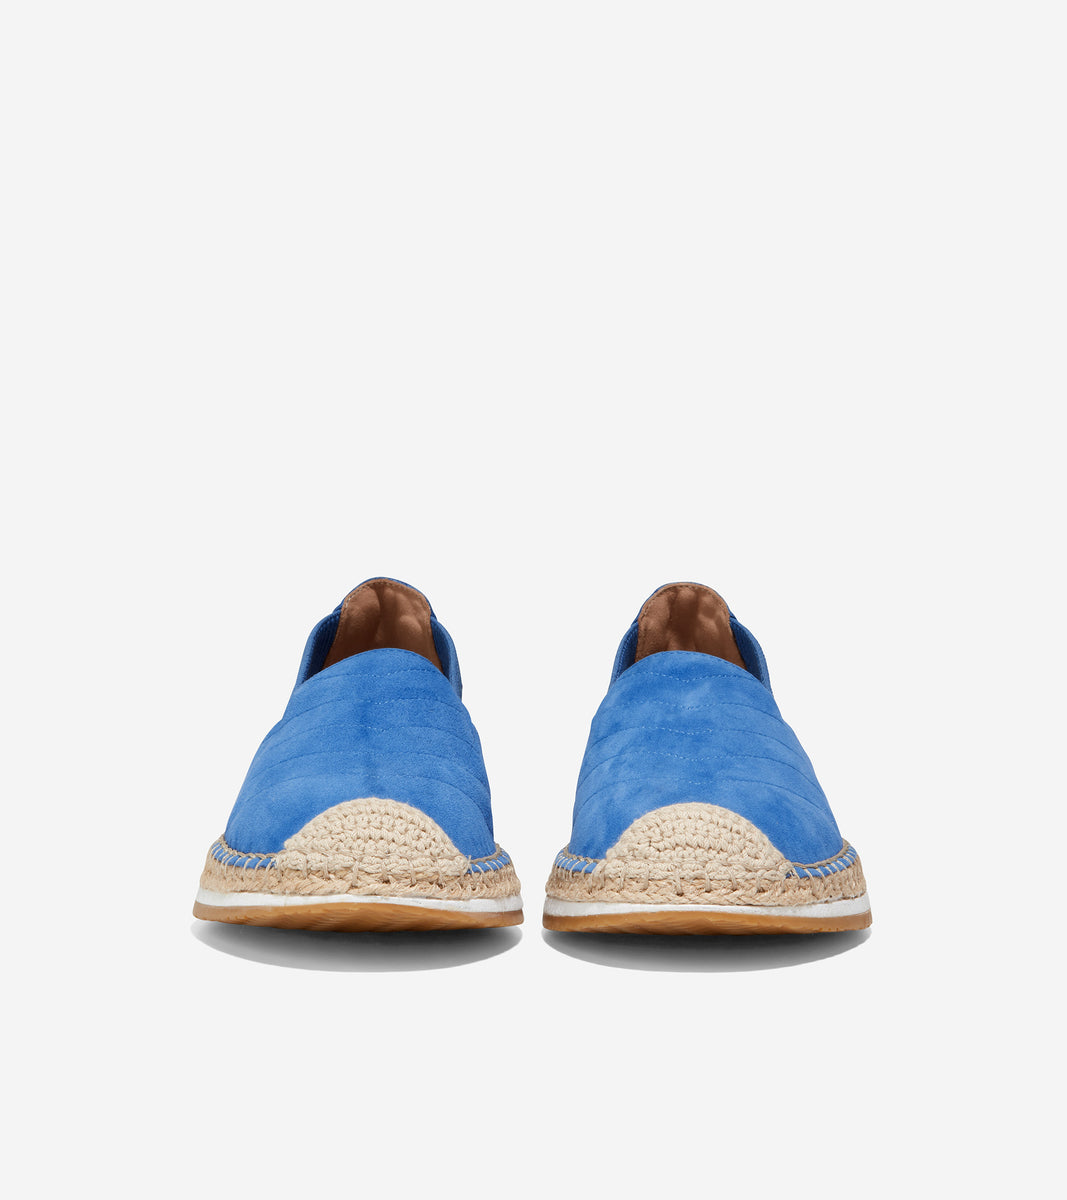 w25218-Cloudfeel Espadrille Loafer-Bright Cobalt